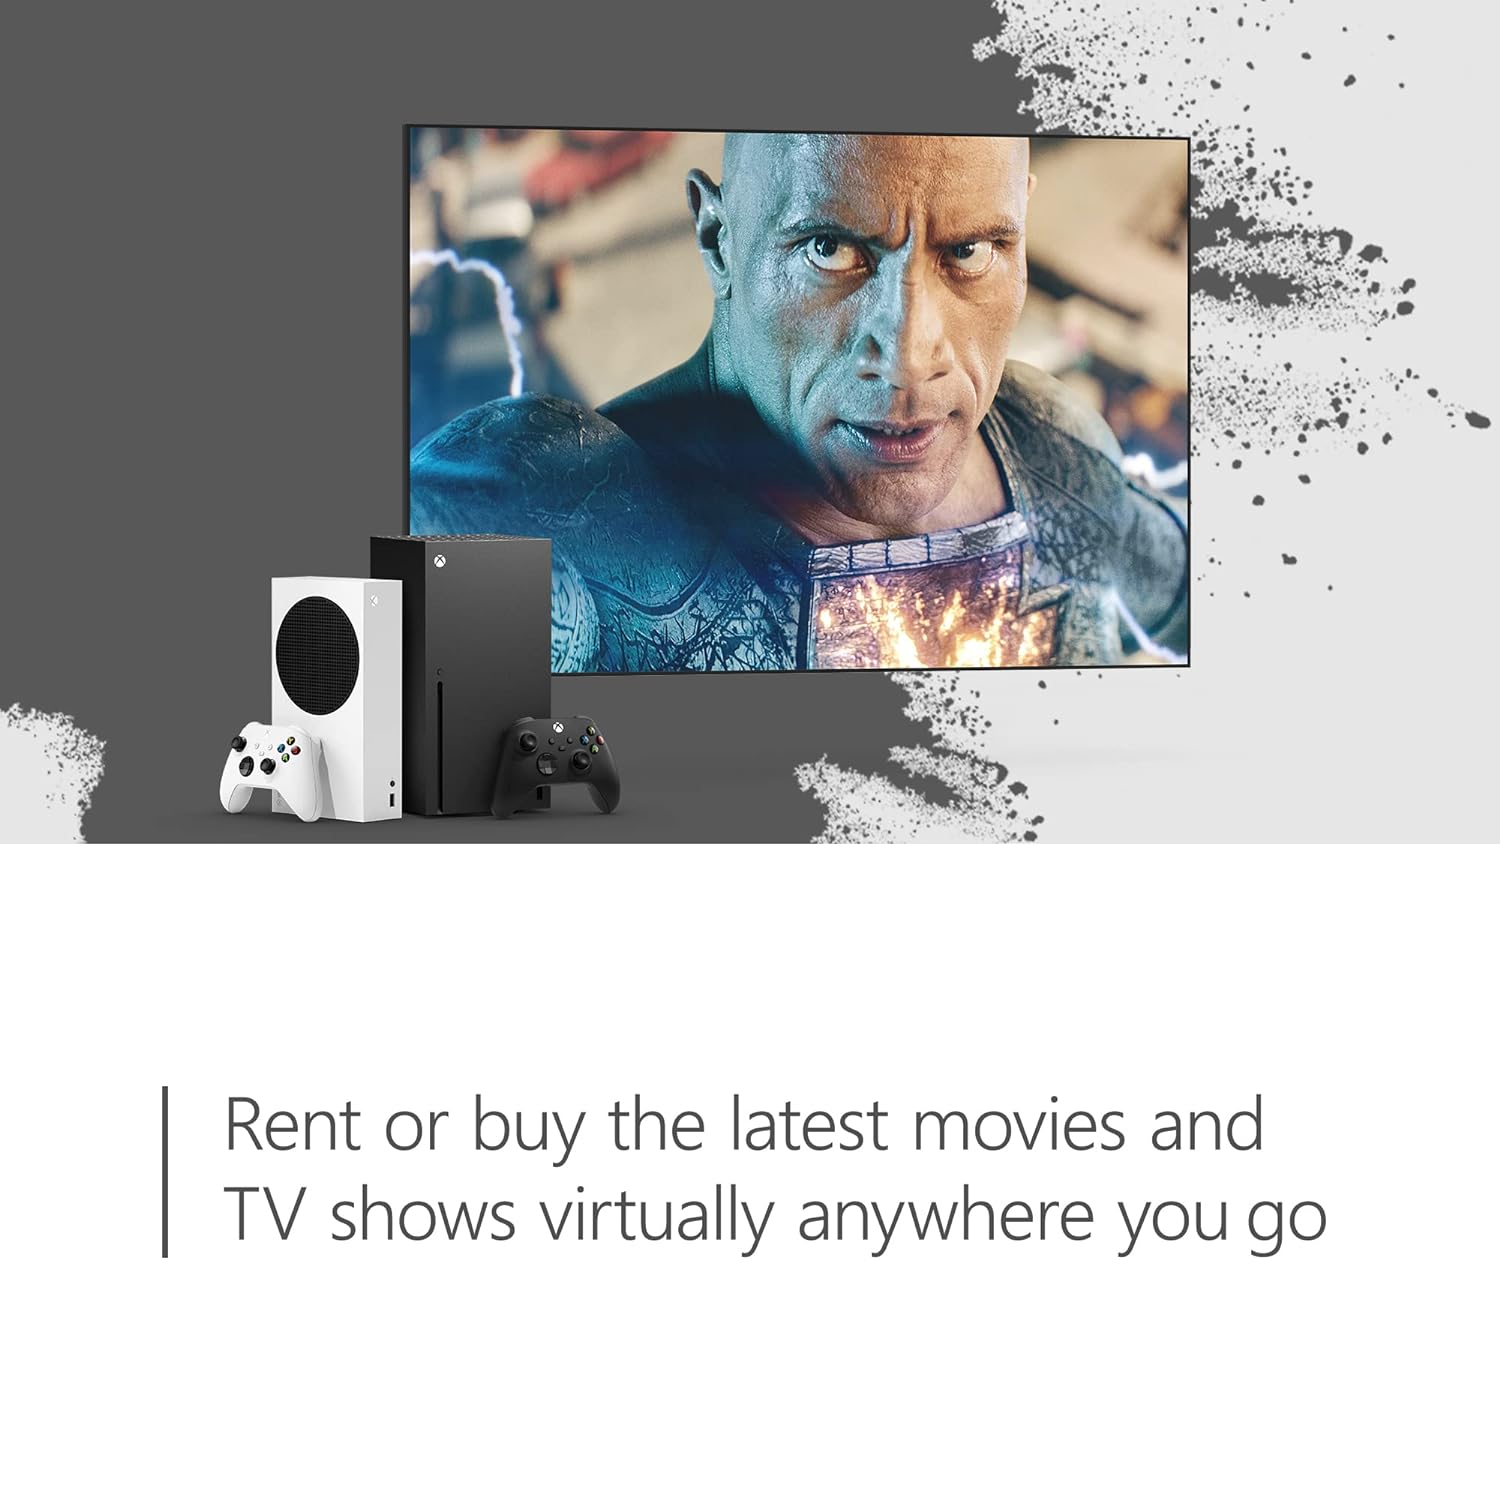 $10 Xbox Digital Gift Card | Rent or buy the latest movies and TV shows virtually anywhere you go.